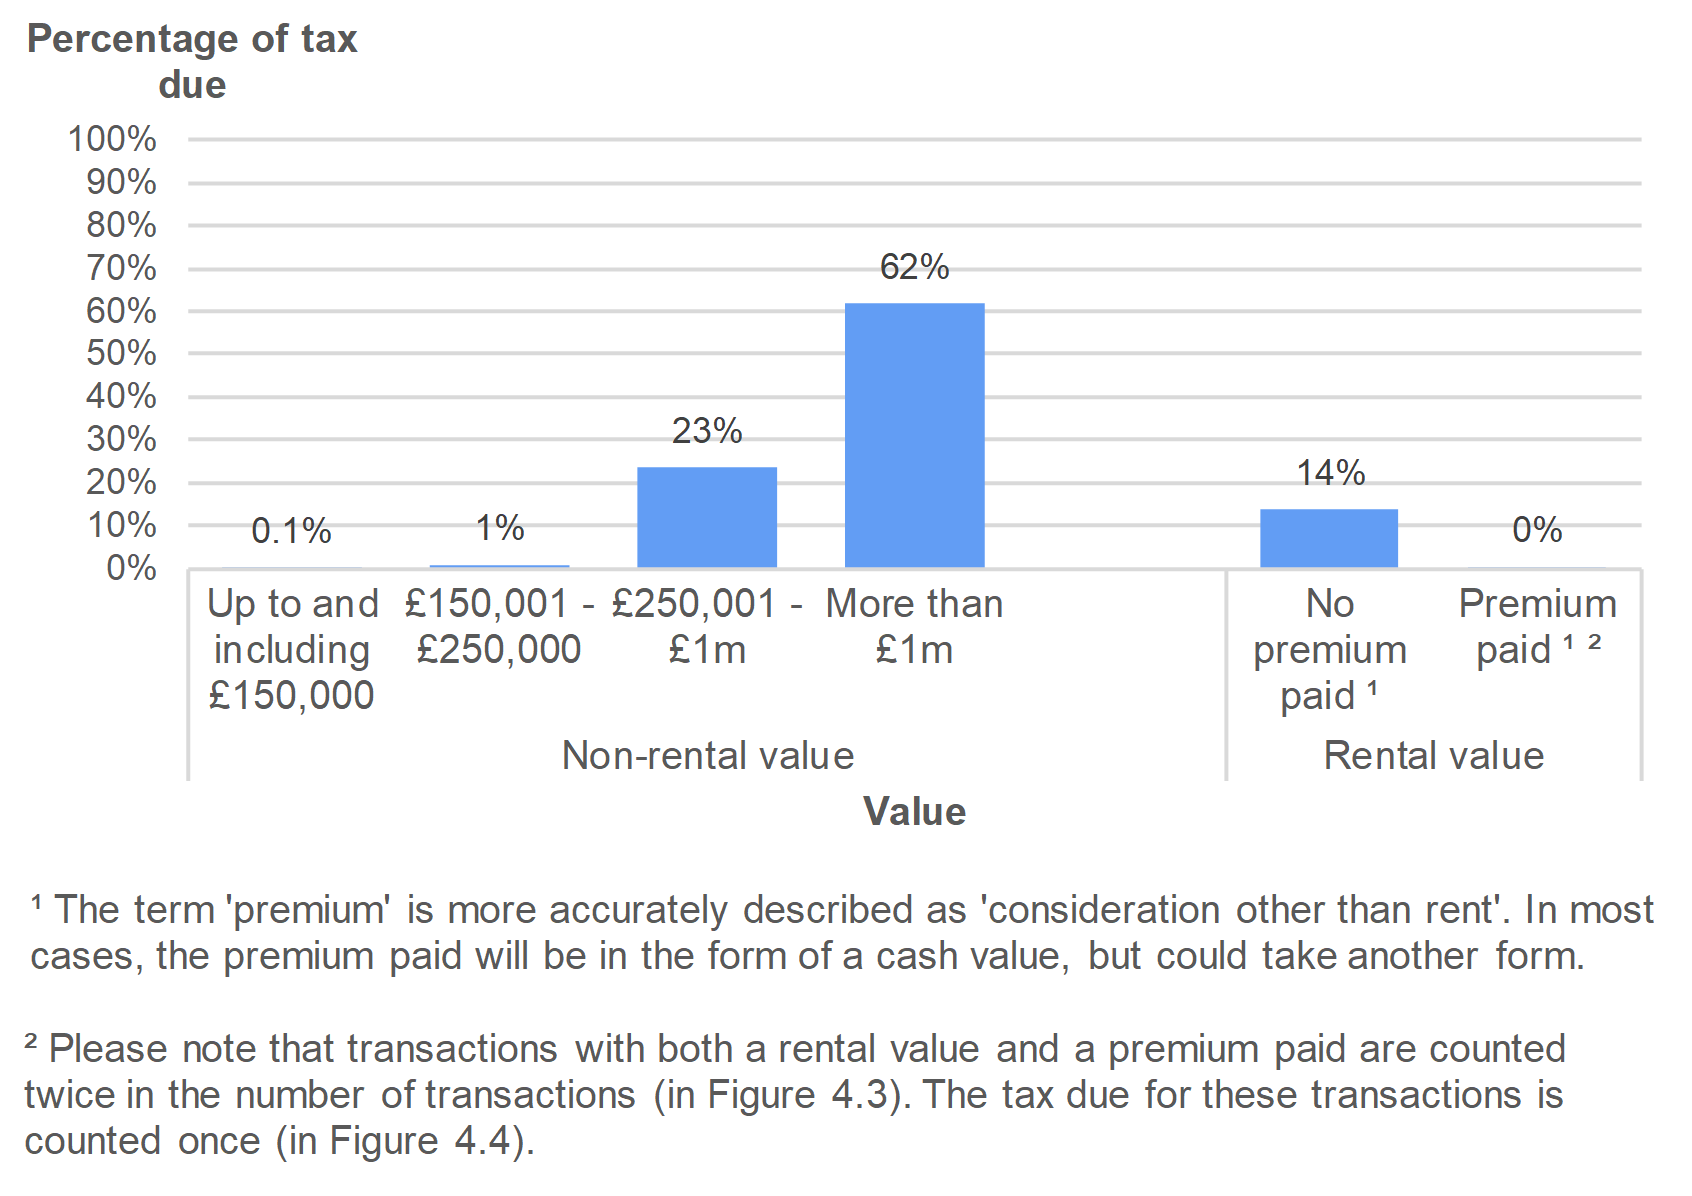 Figure 4.4 shows the amount of tax due on non-residential transactions, by value of the property. Data is presented as the percentage of transactions and relates to transactions effective in July to September 2019.